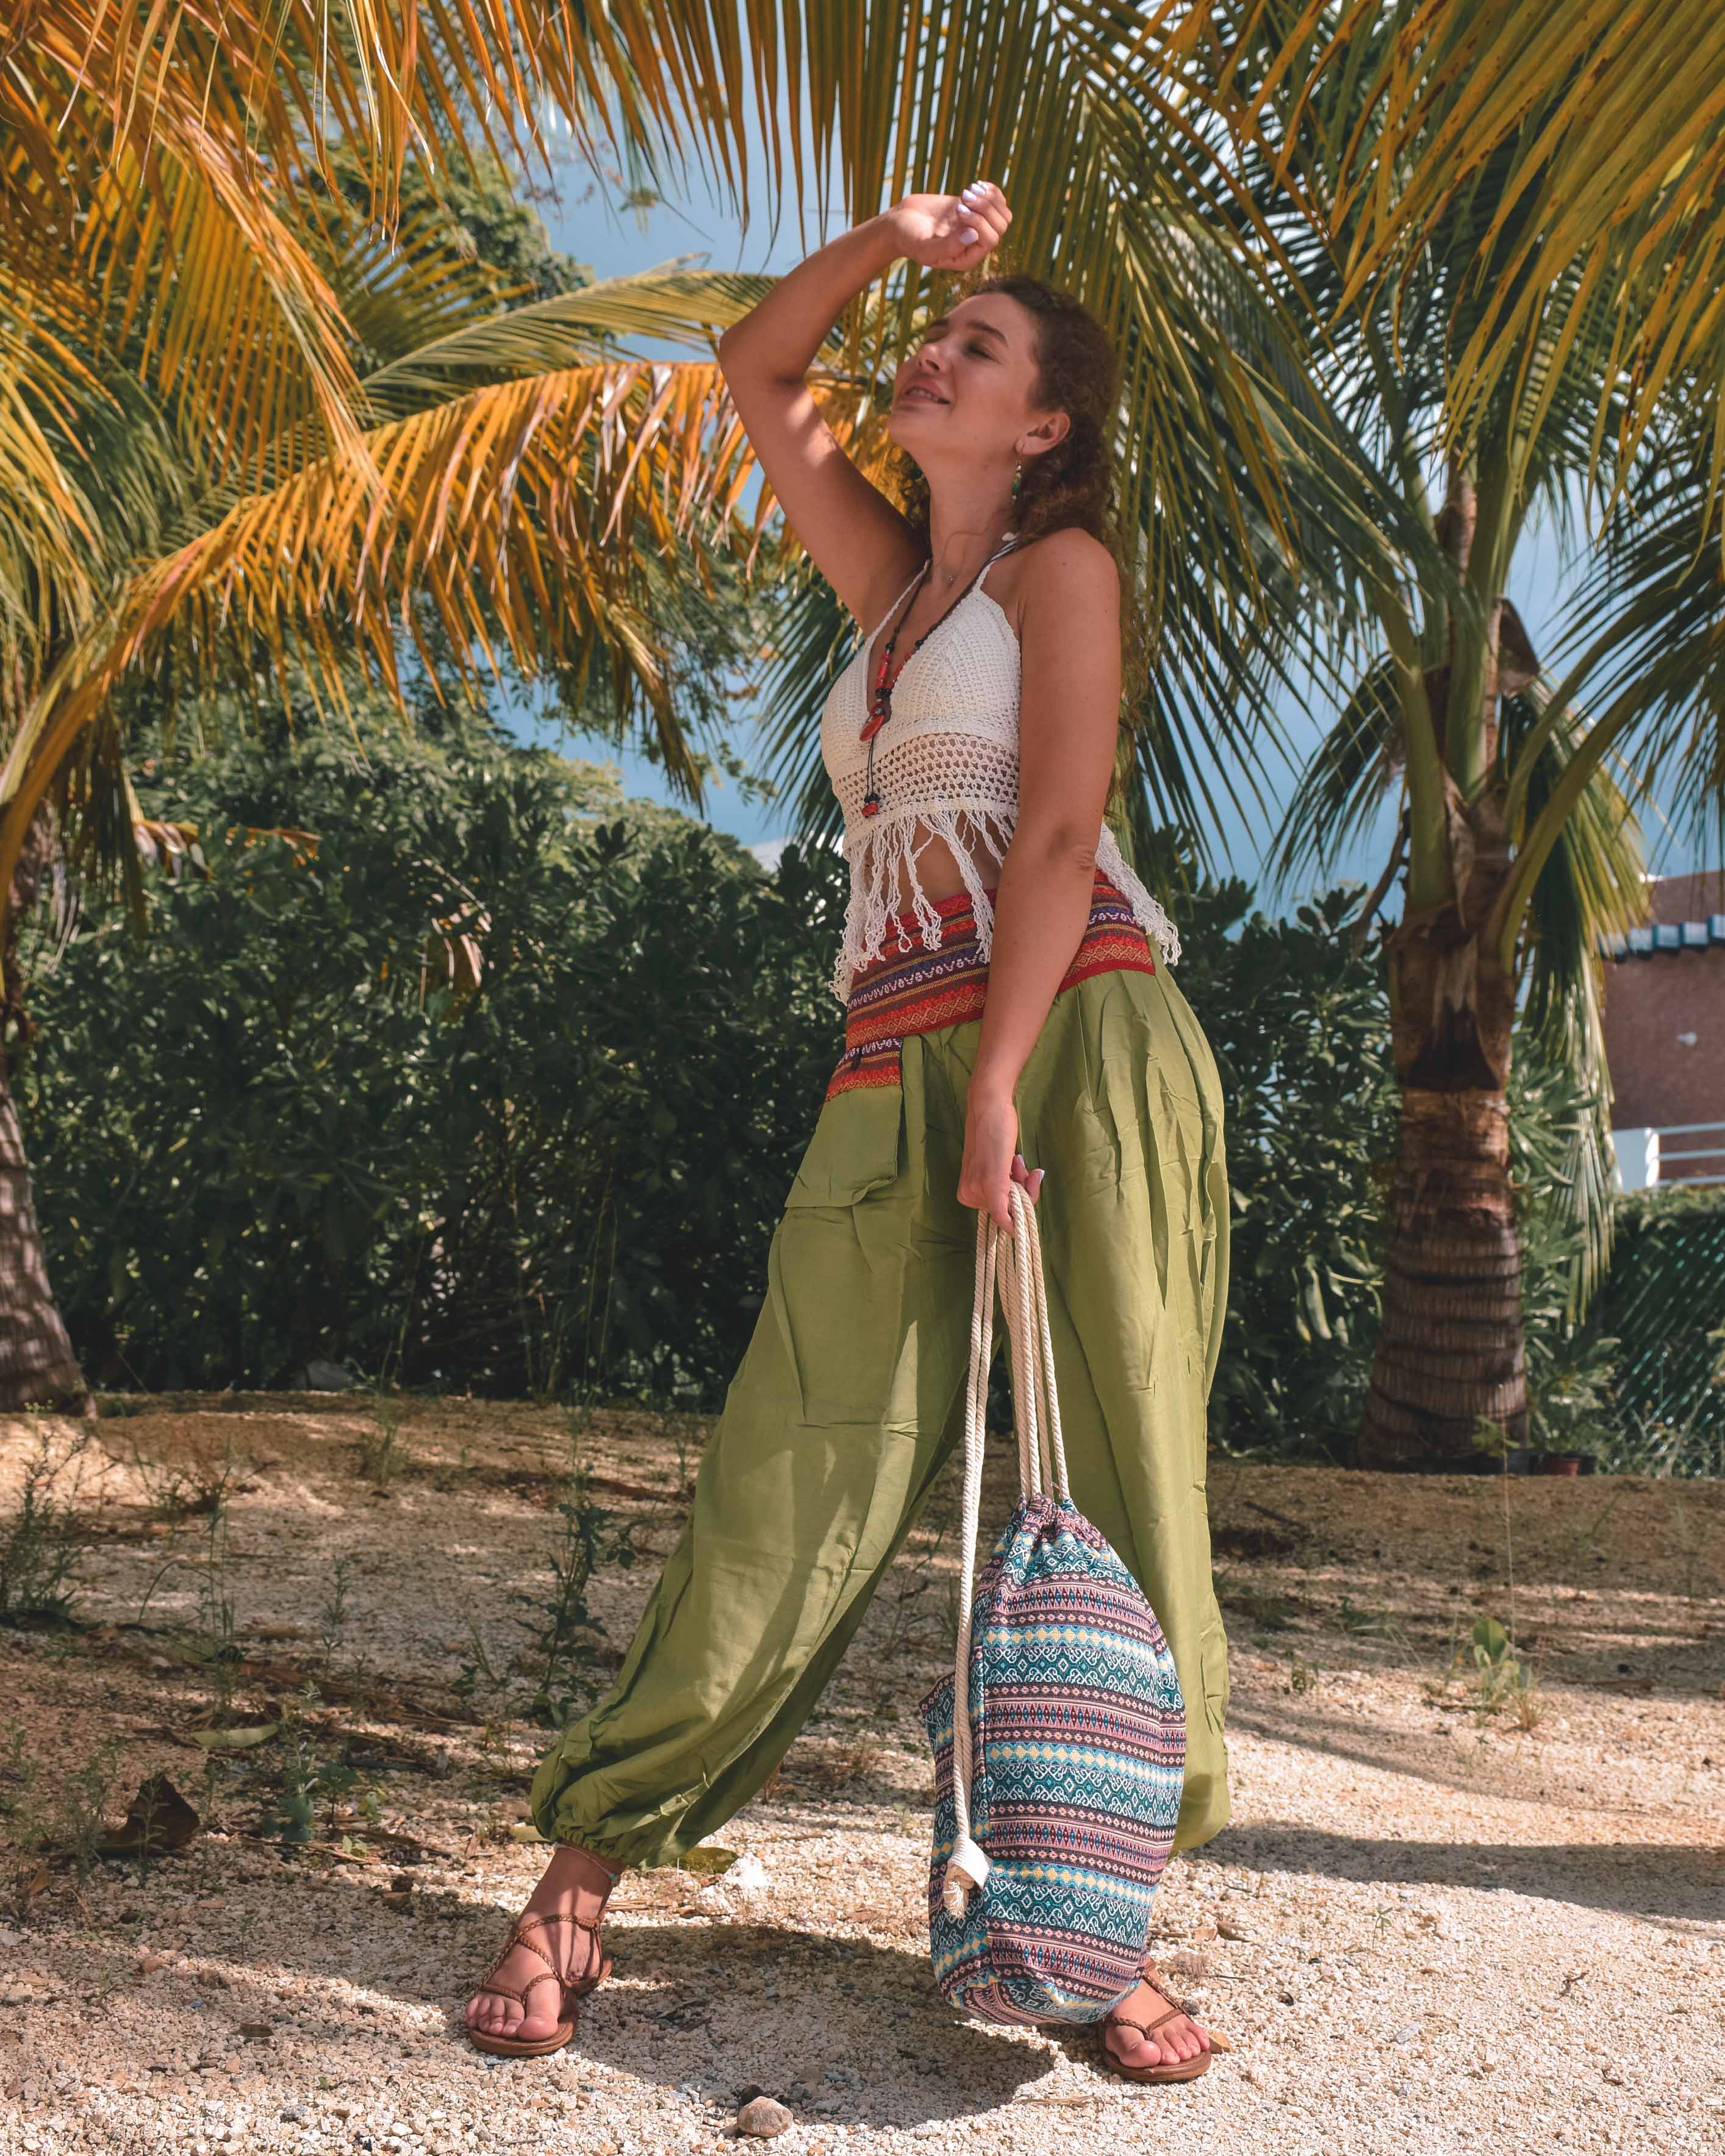 TULUM TOP Elepanta Women's Top - Buy Today Elephant Pants Jewelry And Bohemian Clothes Handmade In Thailand Help To Save The Elephants FairTrade And Vegan